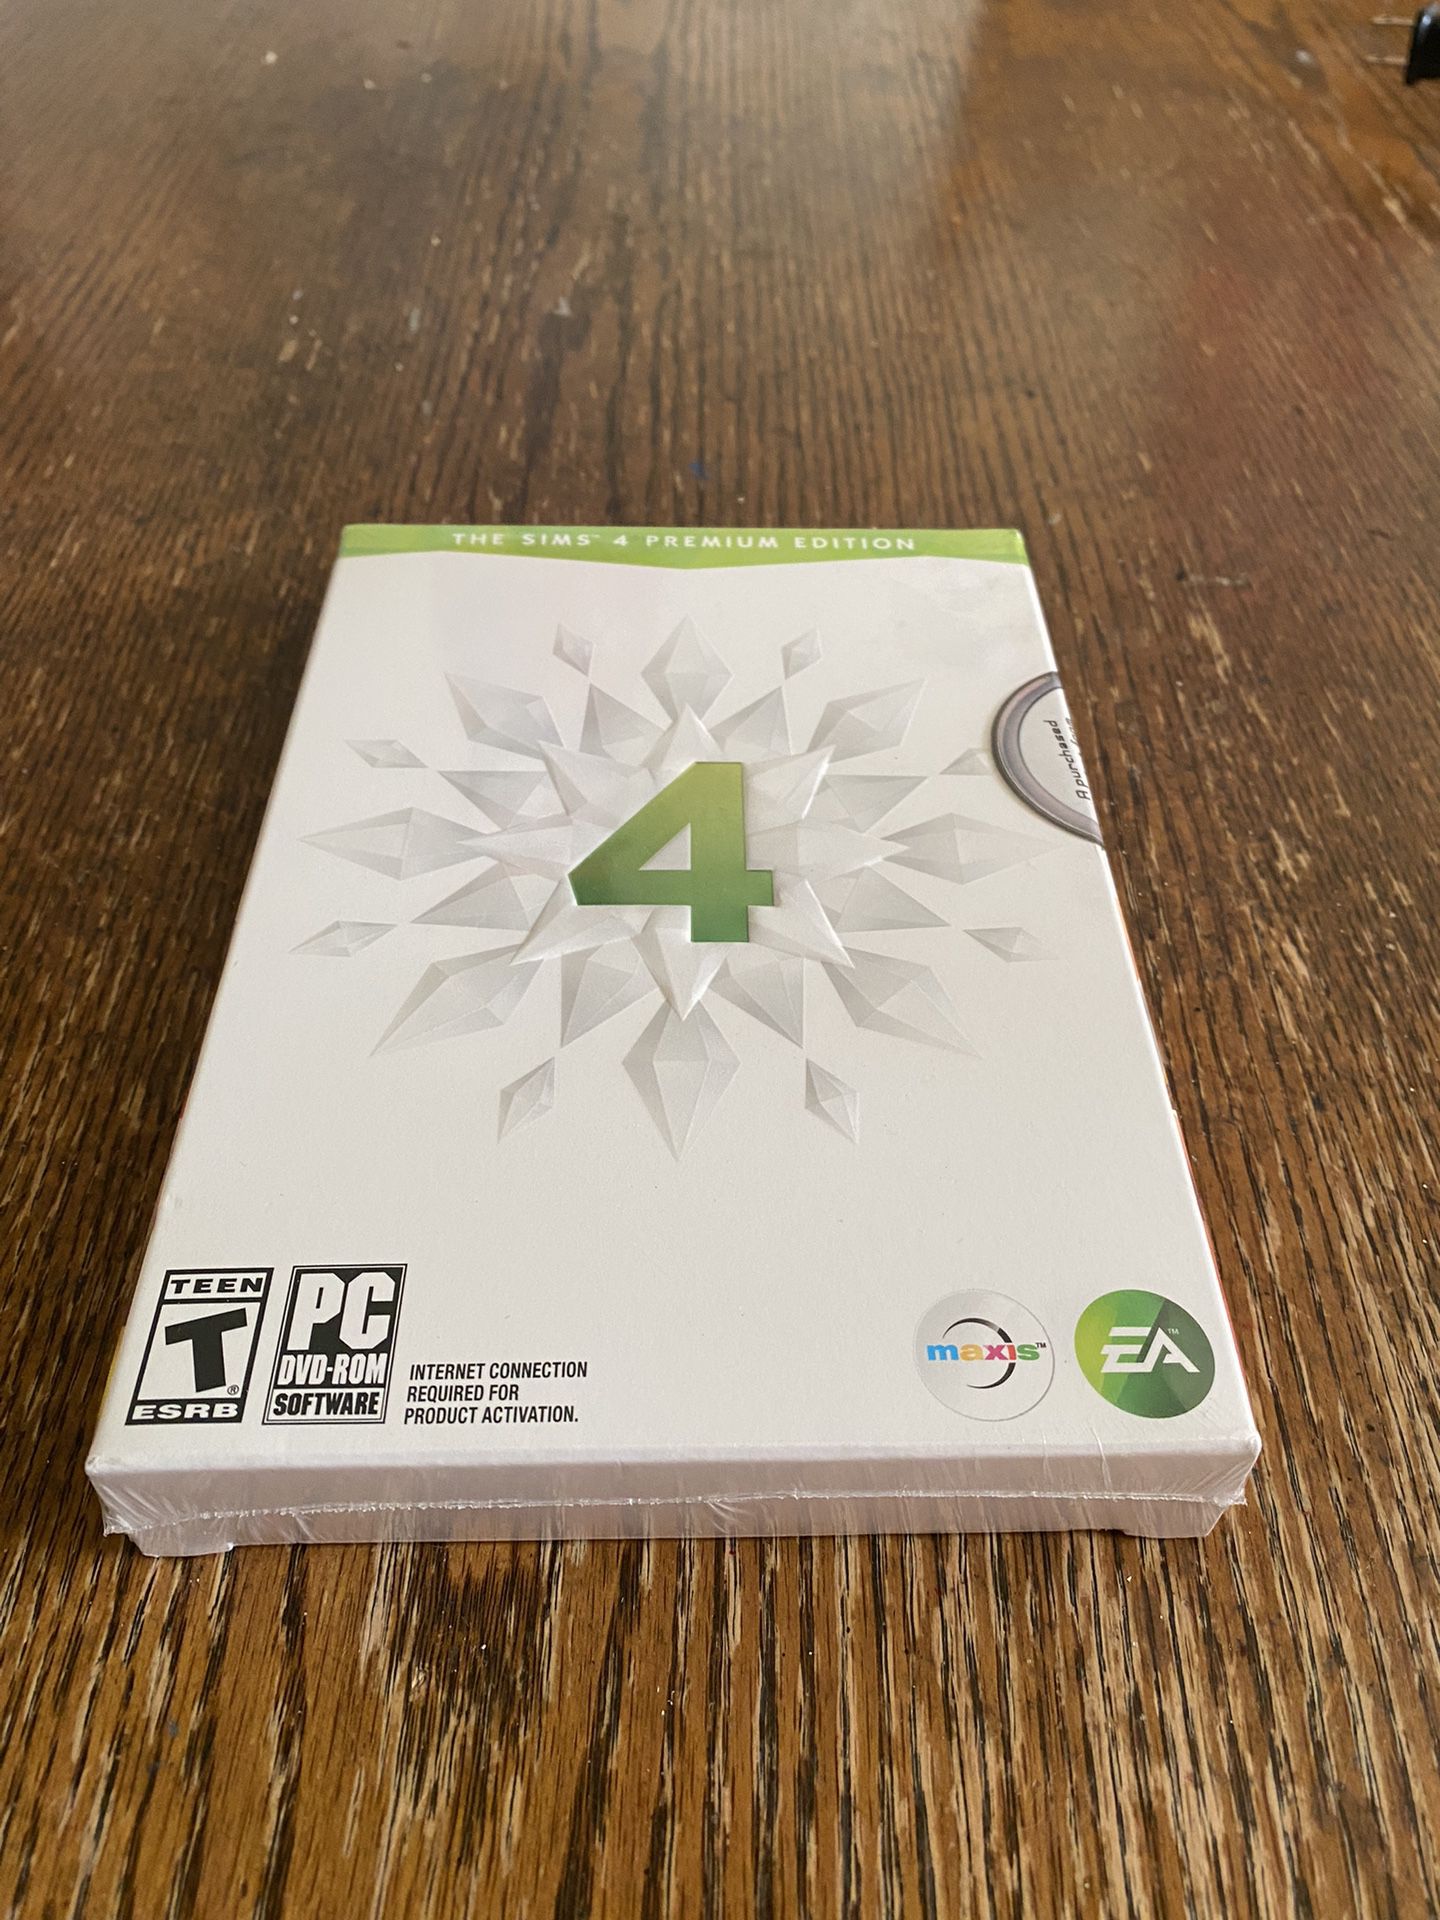 The Sims 4 Premium Edition.  New Sealed PC Game